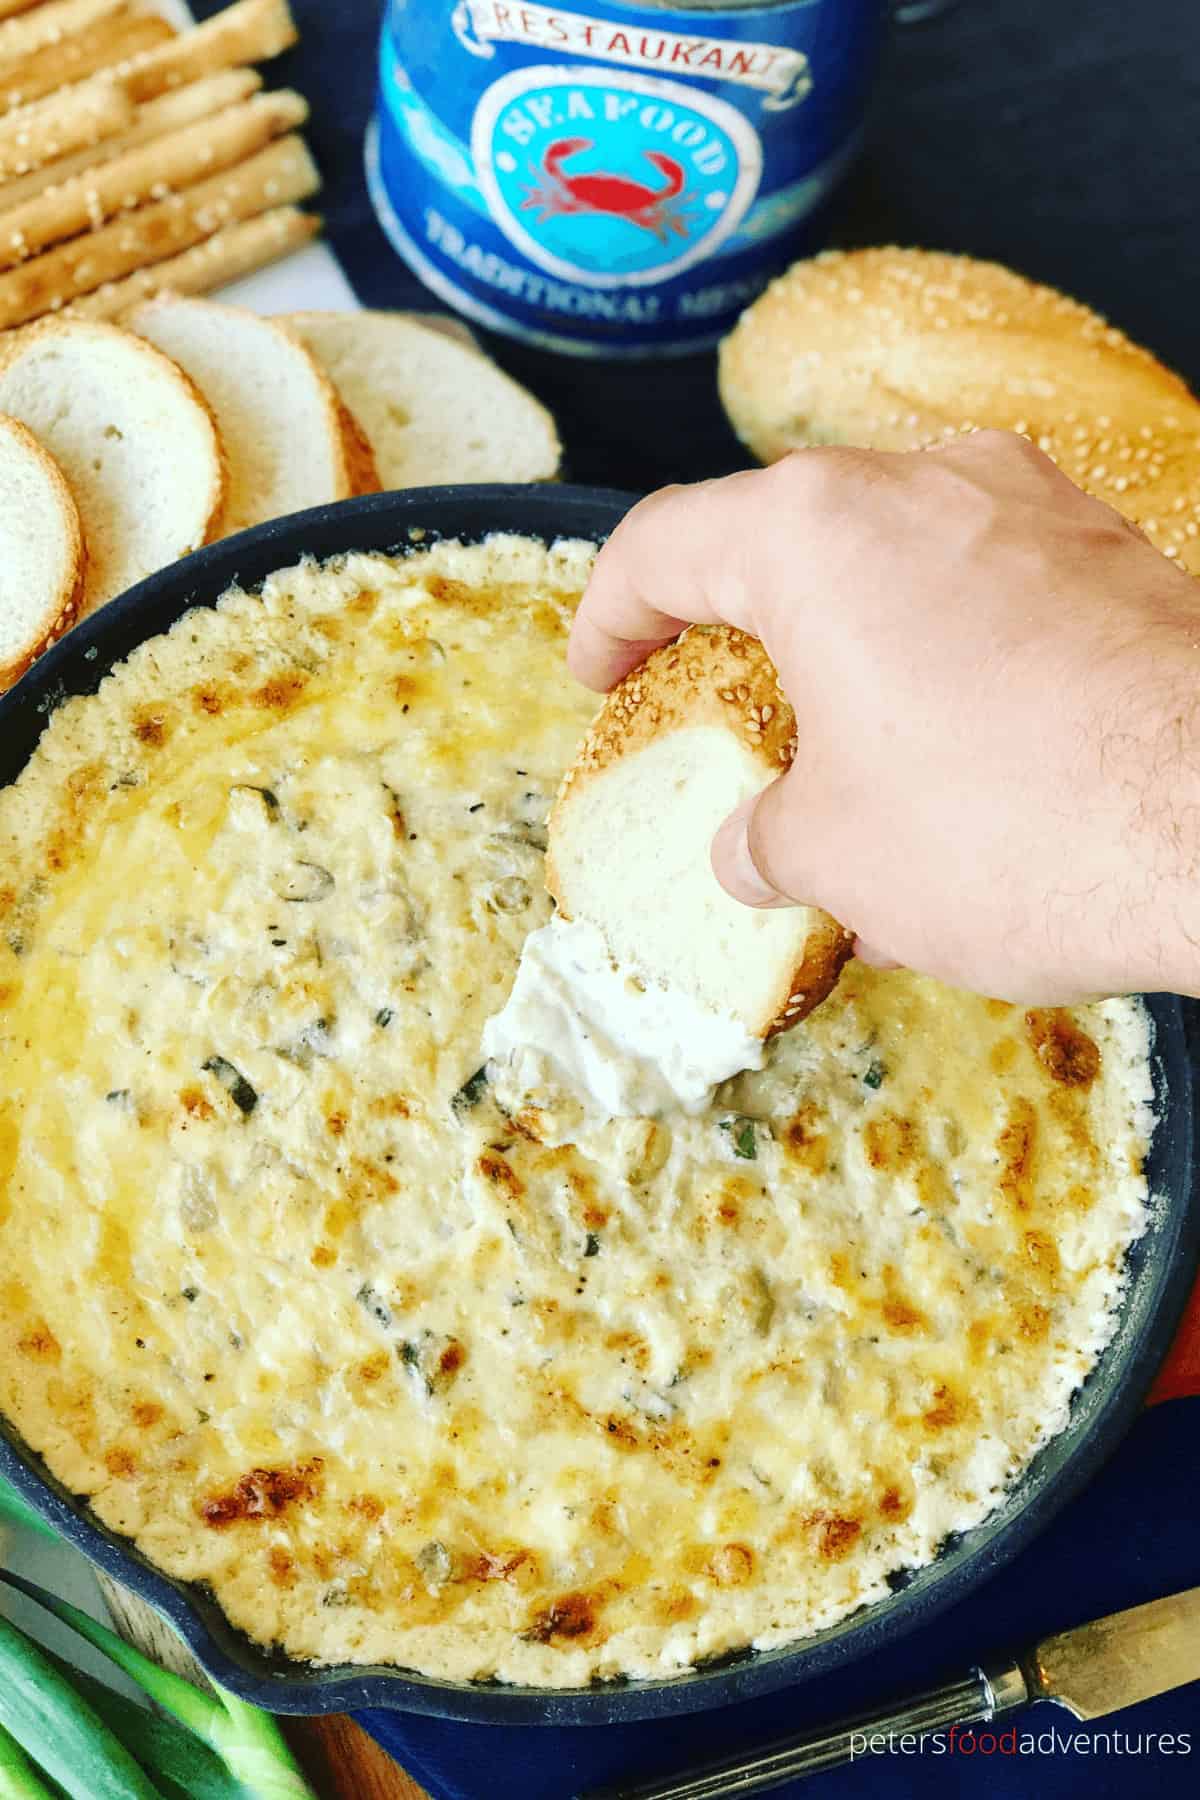 Hot Baked Crab and Artichoke Dip, Super Cheesy! Easy to make, leaving you wanting more. The perfect appetizer for party food! Crab Artichoke Dip